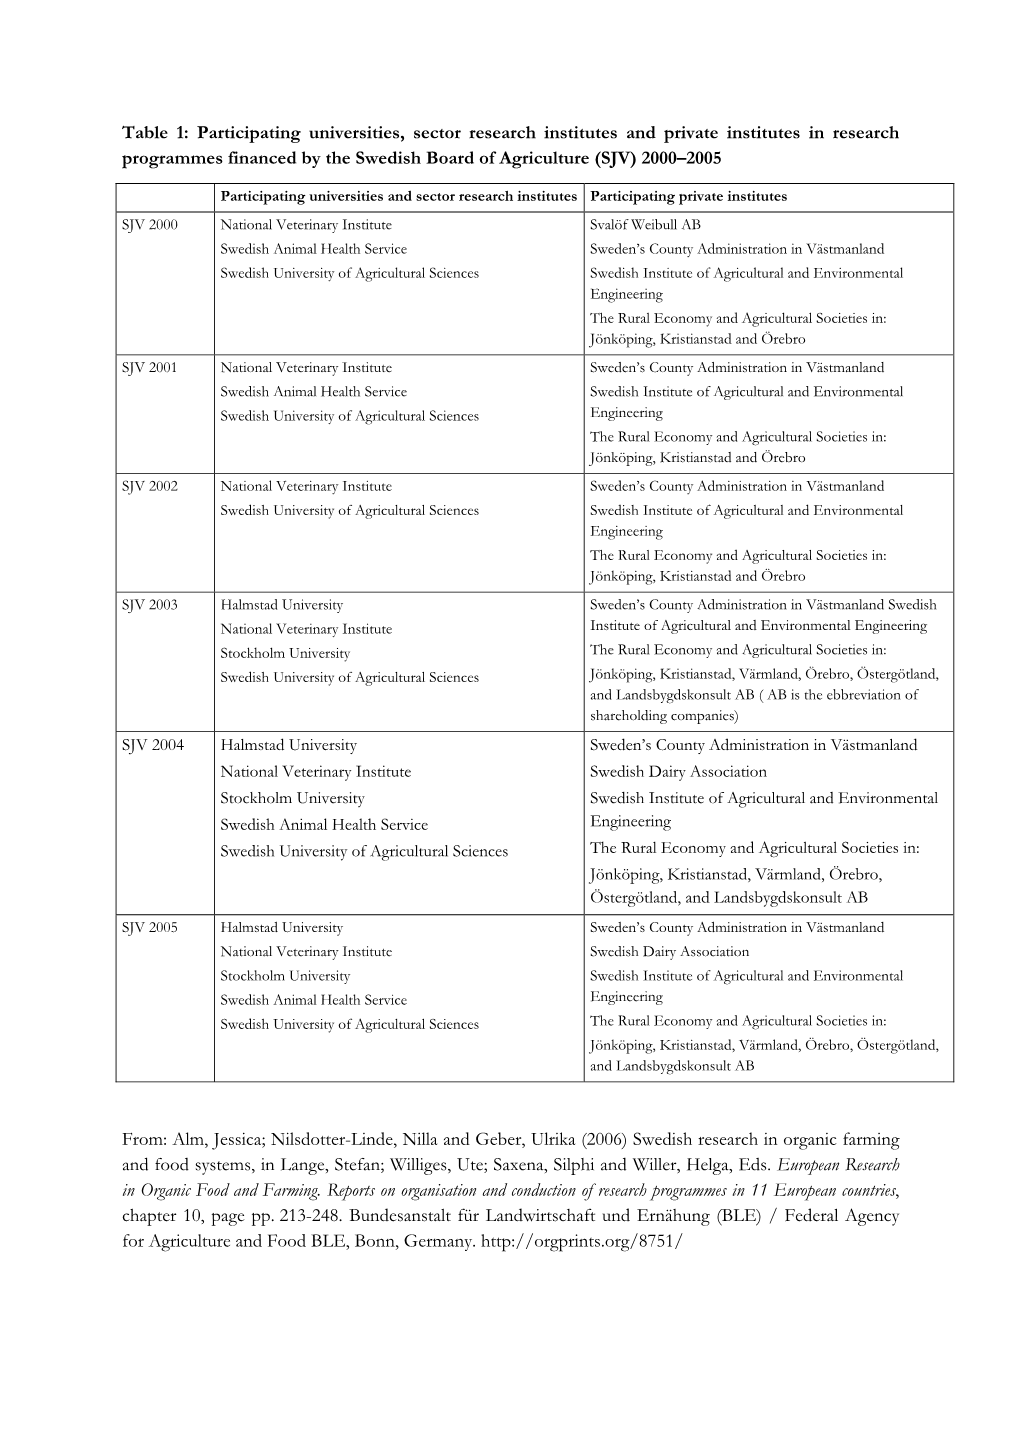 Table 1: Participating Universities, Sector Research Institutes And